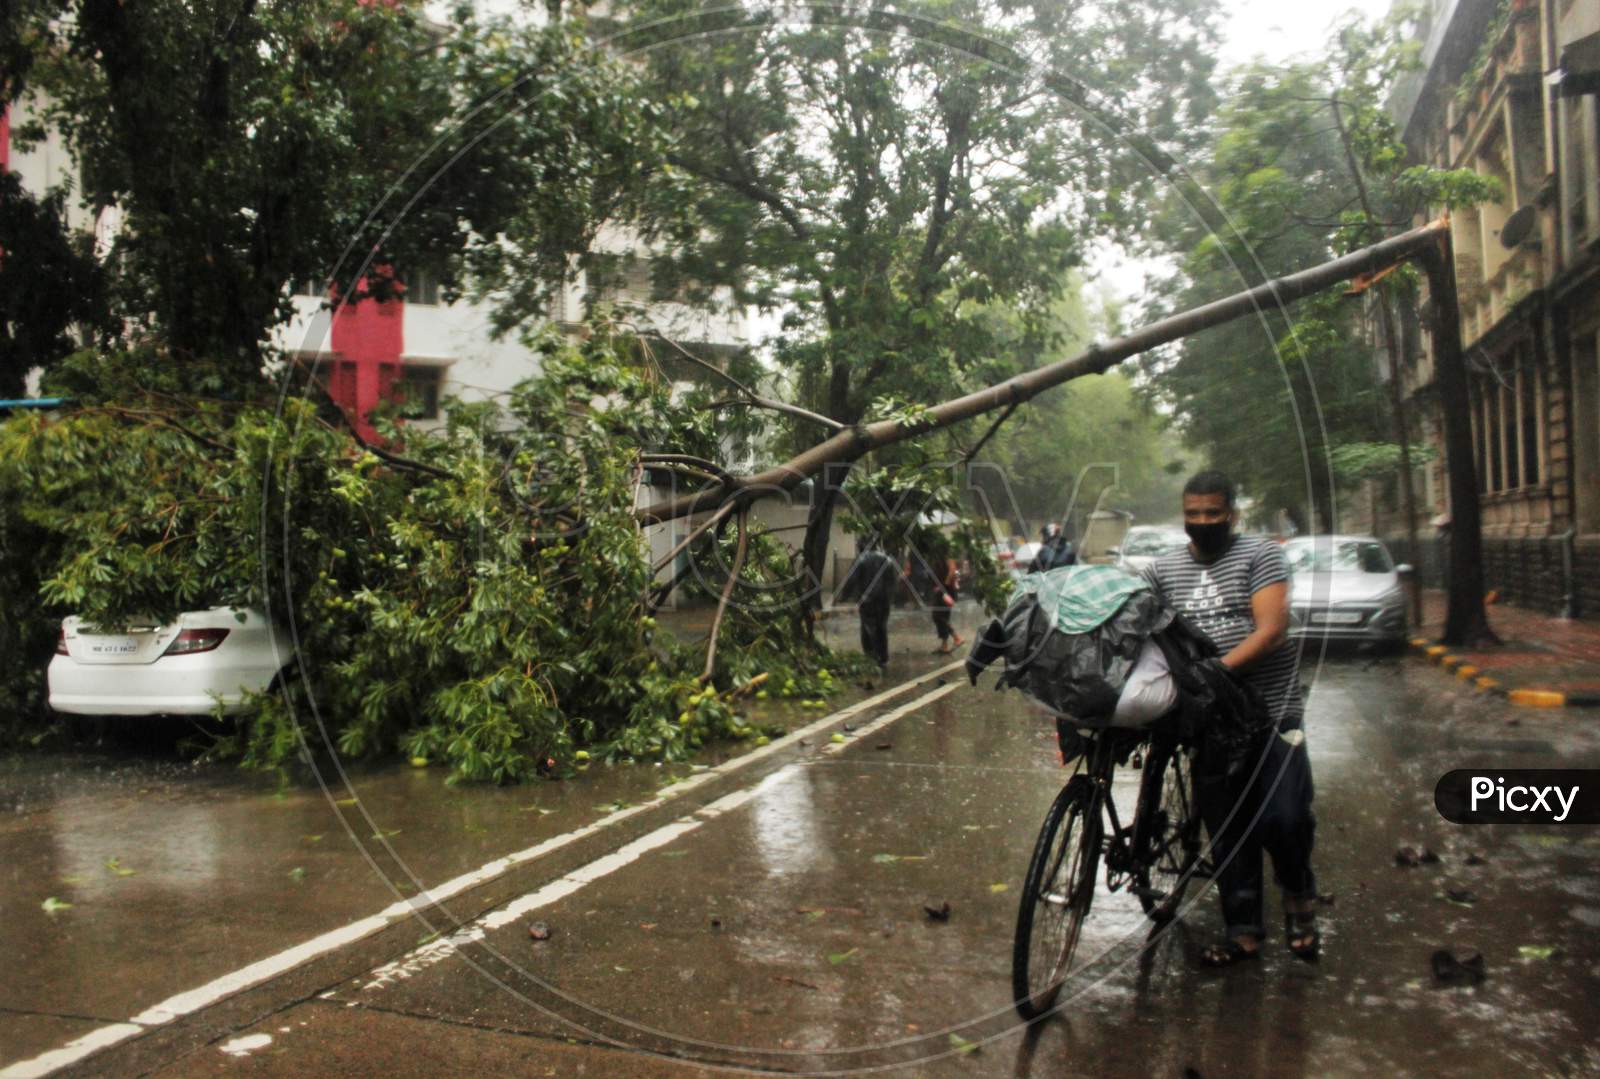 A man walks past a fallen tree, during heavy rains, in Mumbai, India on July 7, 2020.